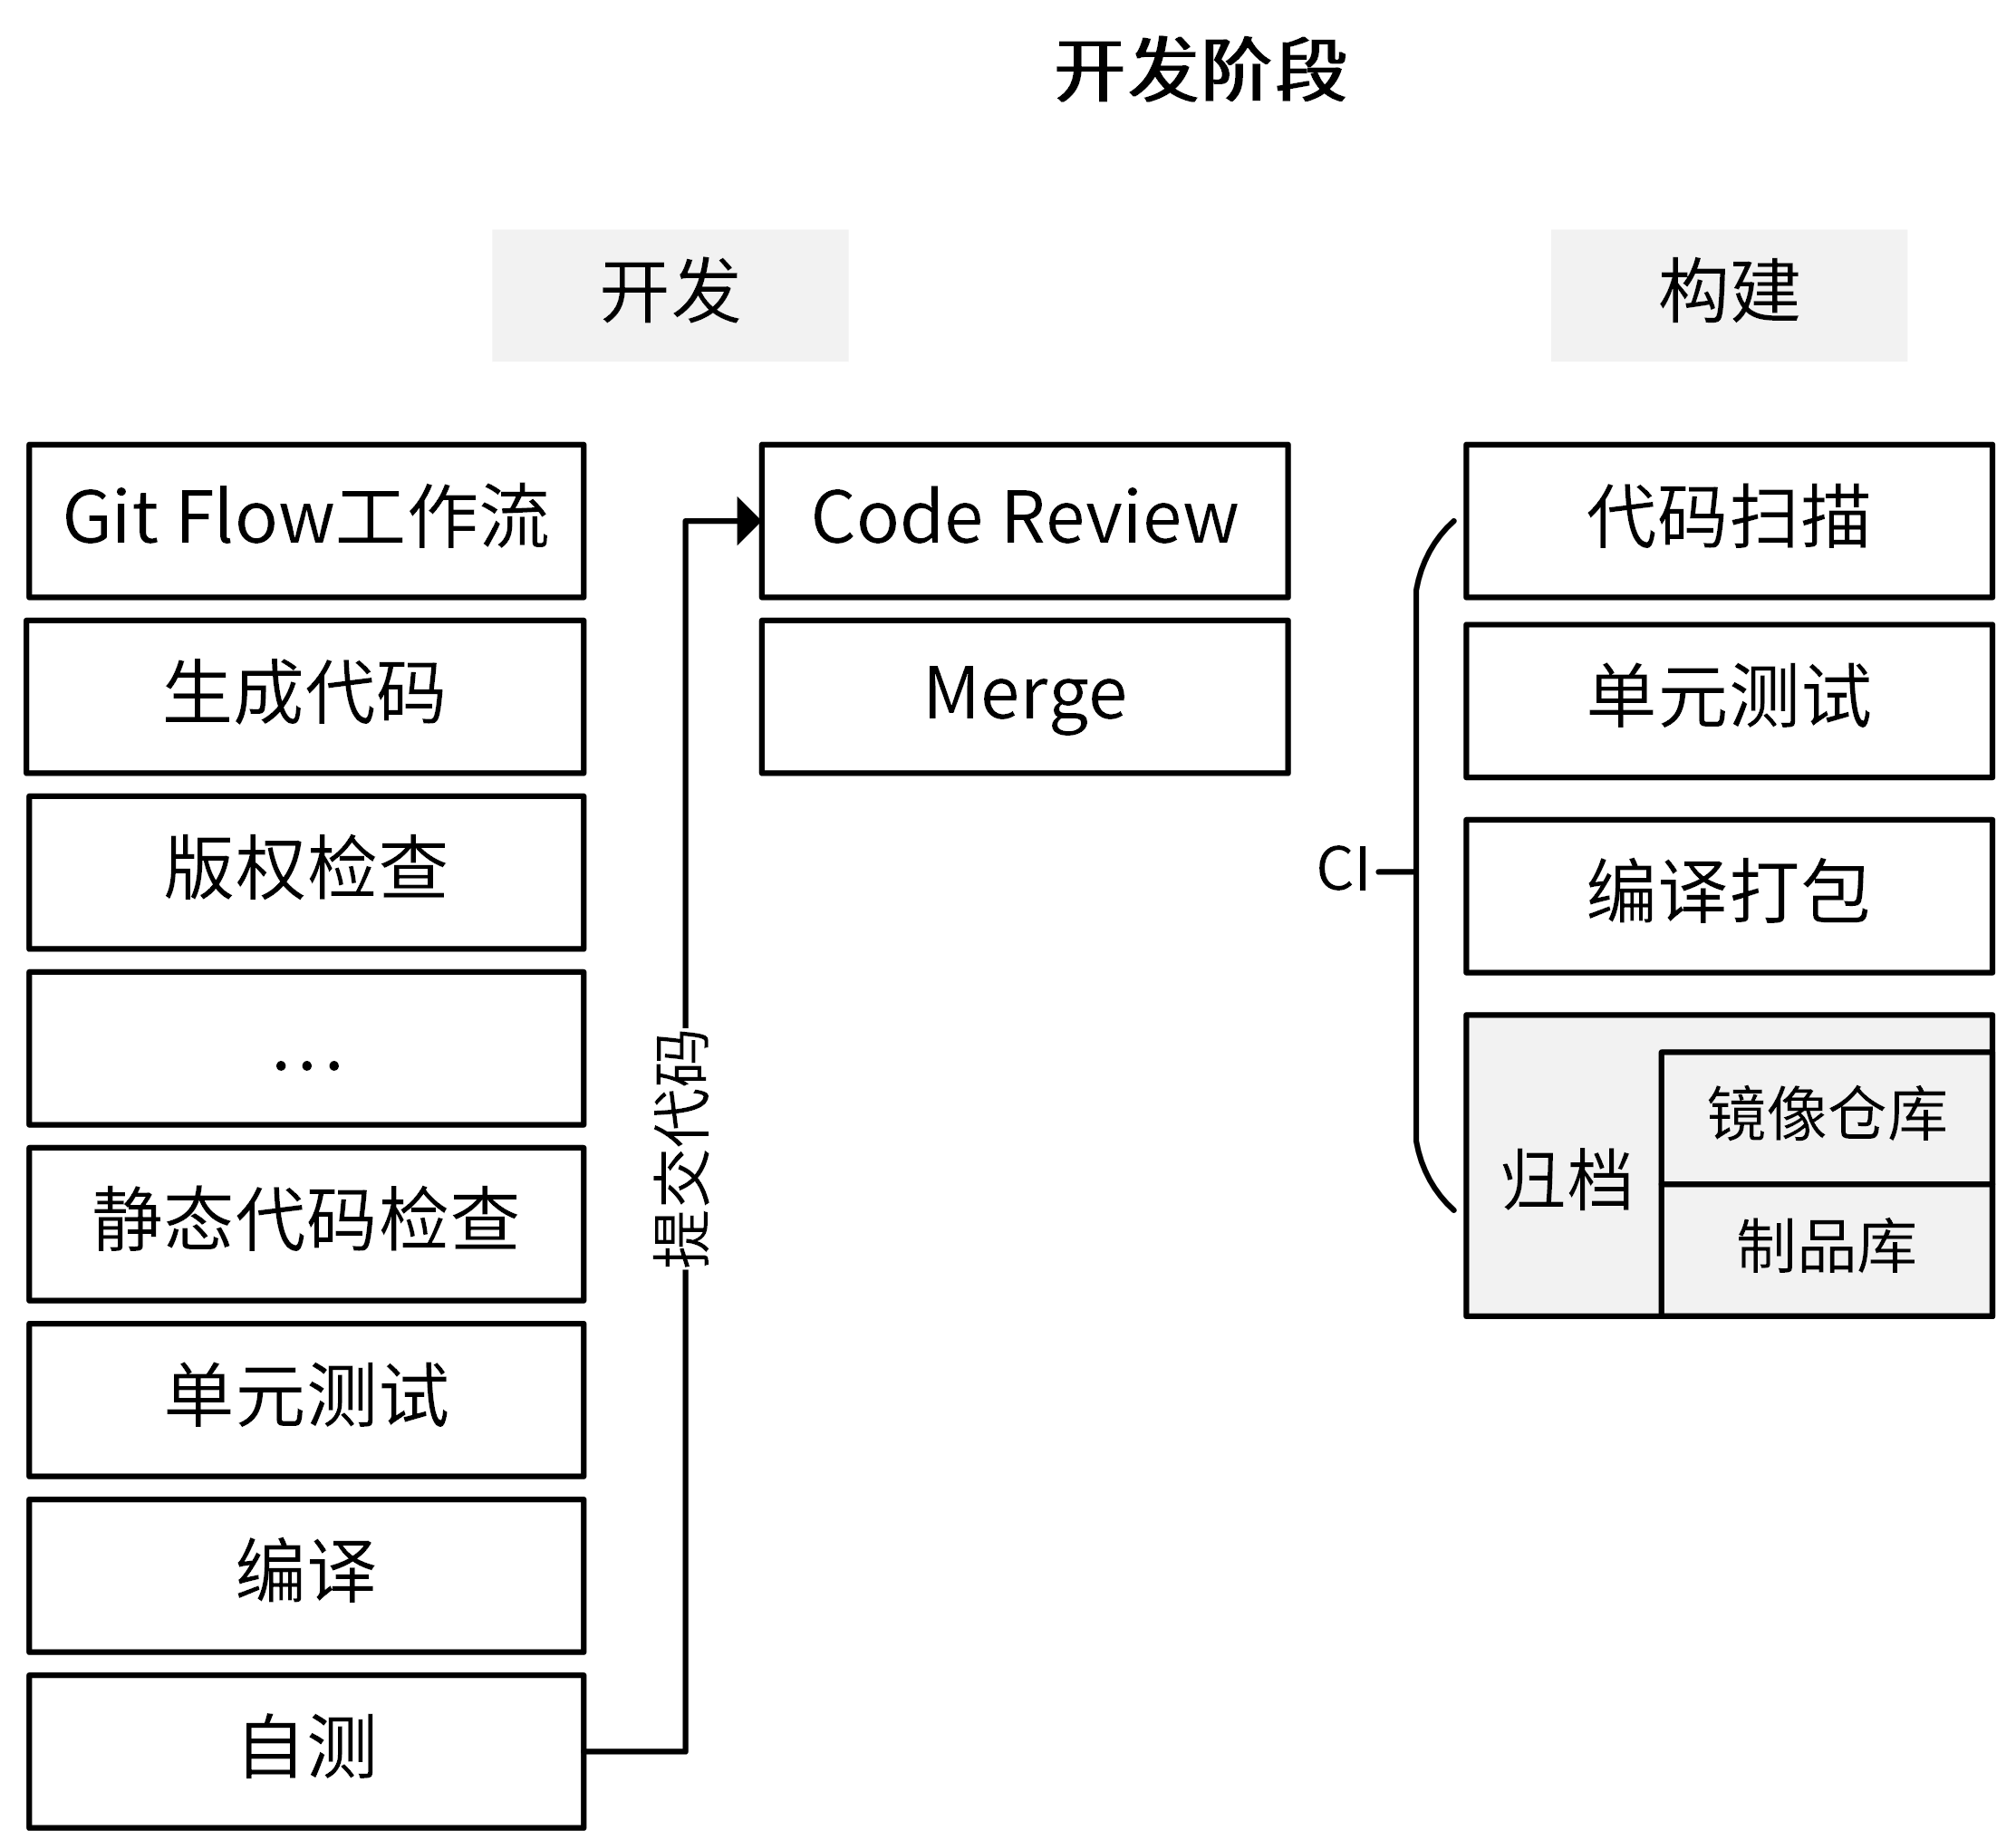 https://img.zhaoweiguo.com/knowledge/images/soft-engineerings/standard-devflow1.png